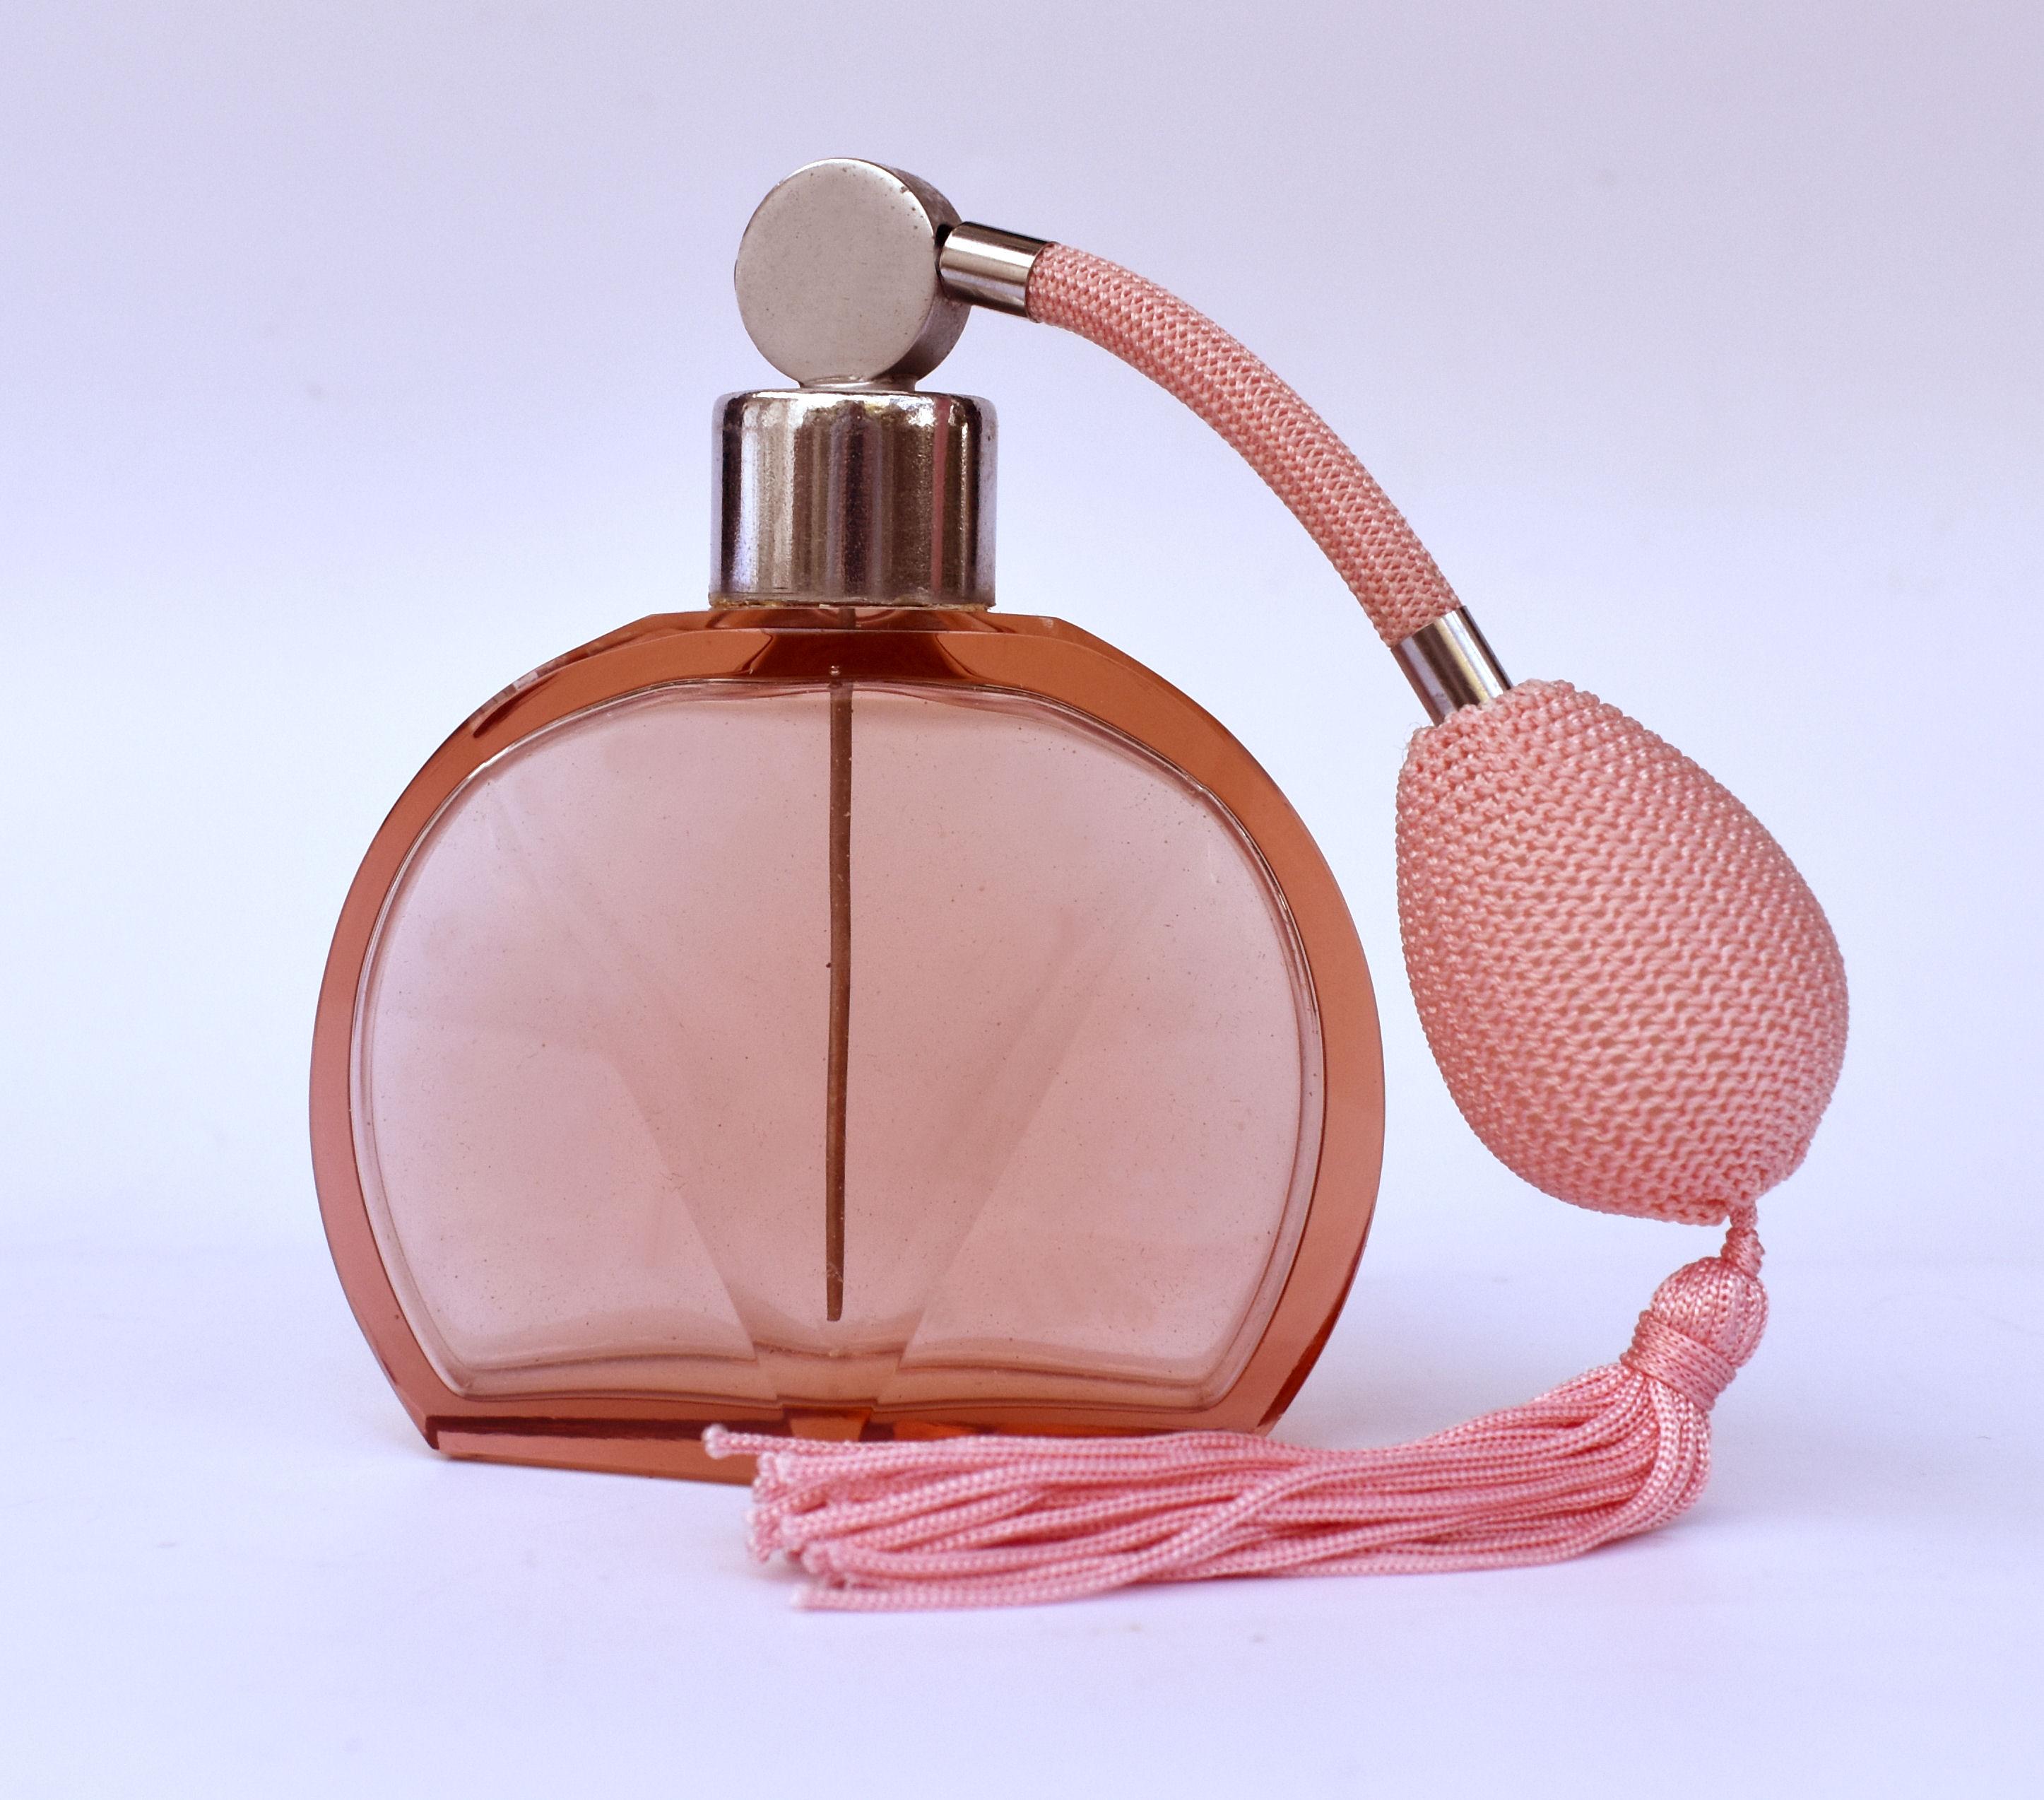 This large perfume atomiser is an absolute delight. 1930's authentic Art Deco with a very desirable overall design in peachy color. Glass is in excellent condition with no damage or flaws to report. The tassel and puffer are also in good condition